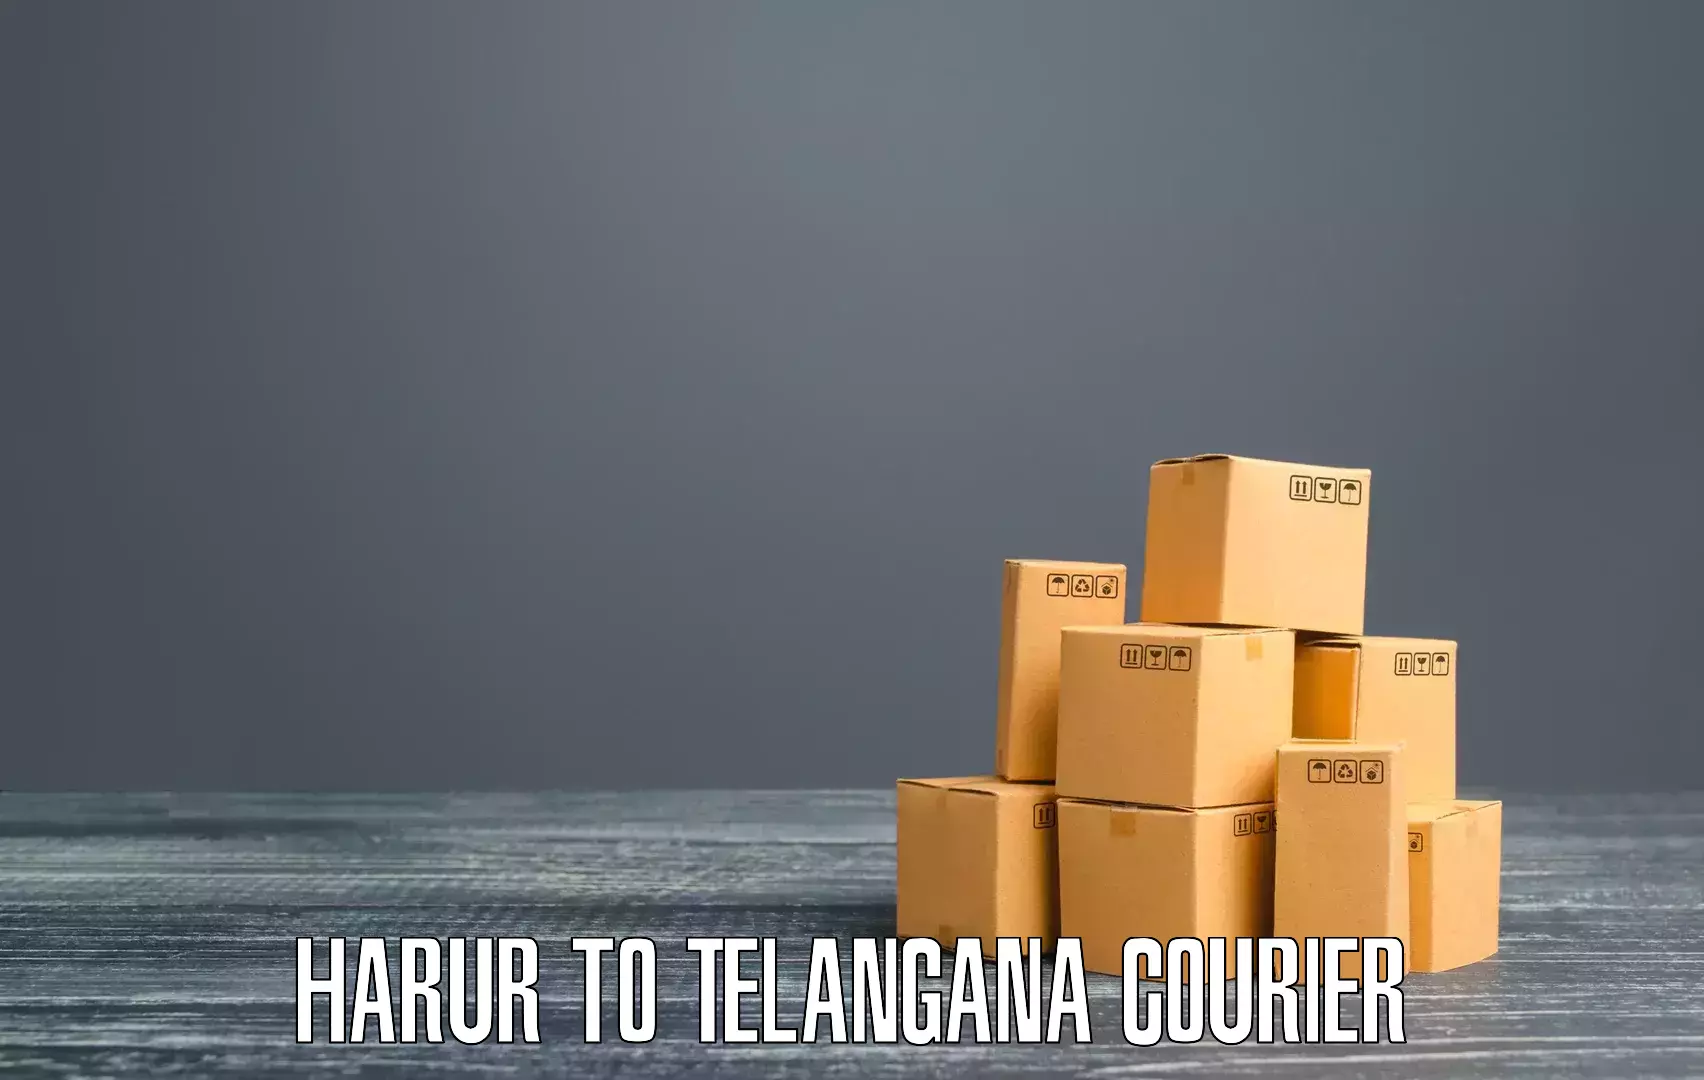 Easy access courier services Harur to Sultanabad